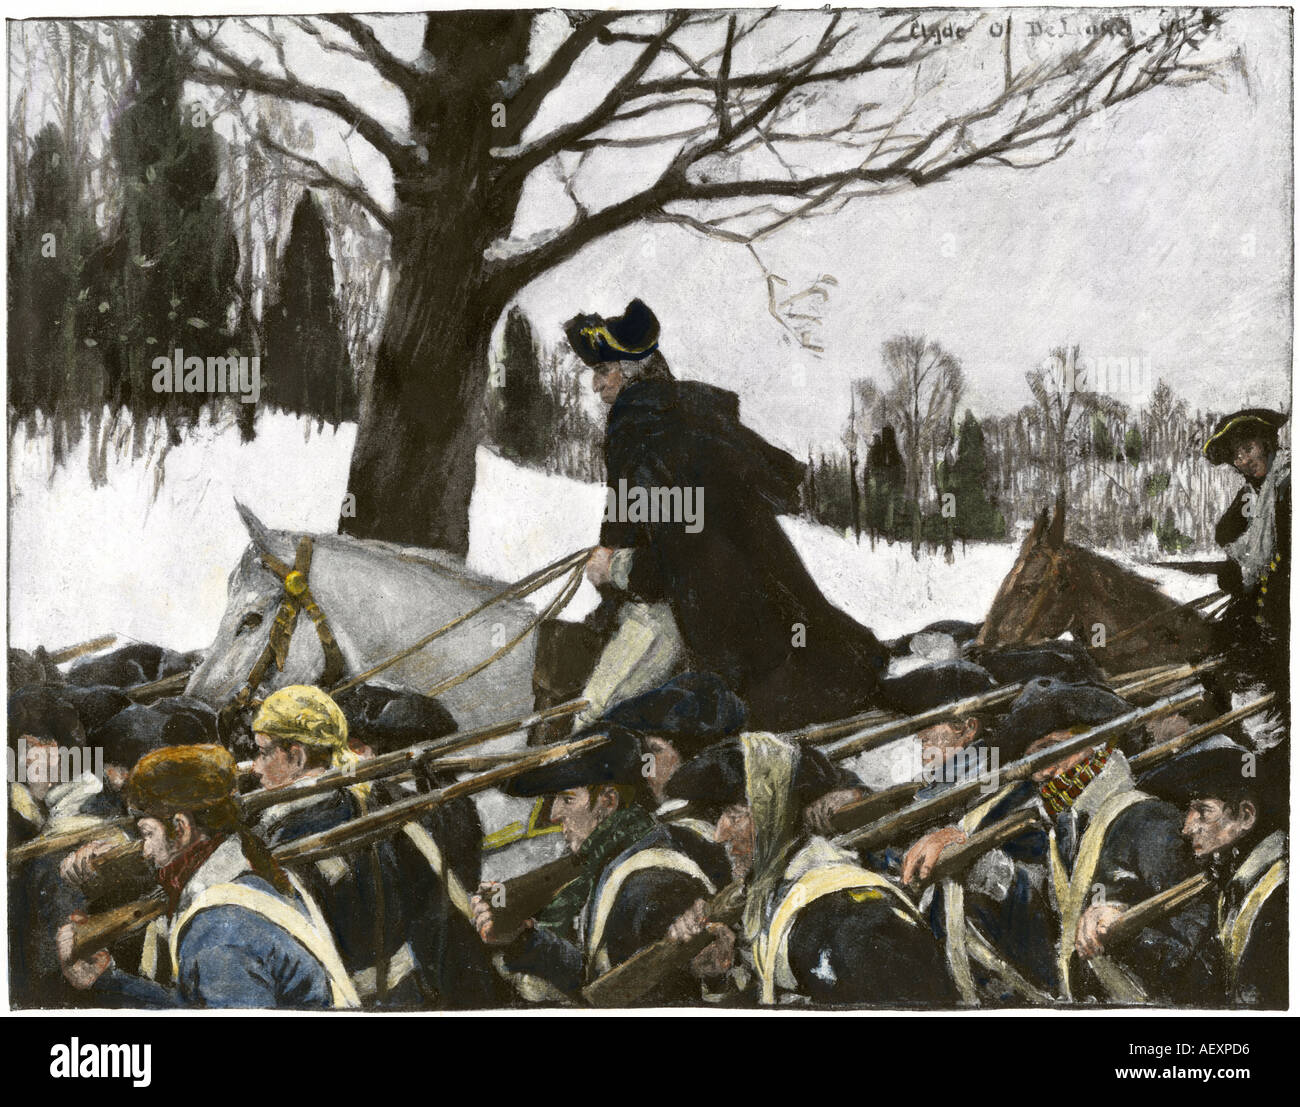 General George Washington leading the Continental Army to Valley Forge winter camp. Hand-colored halftone of an illustration Stock Photo